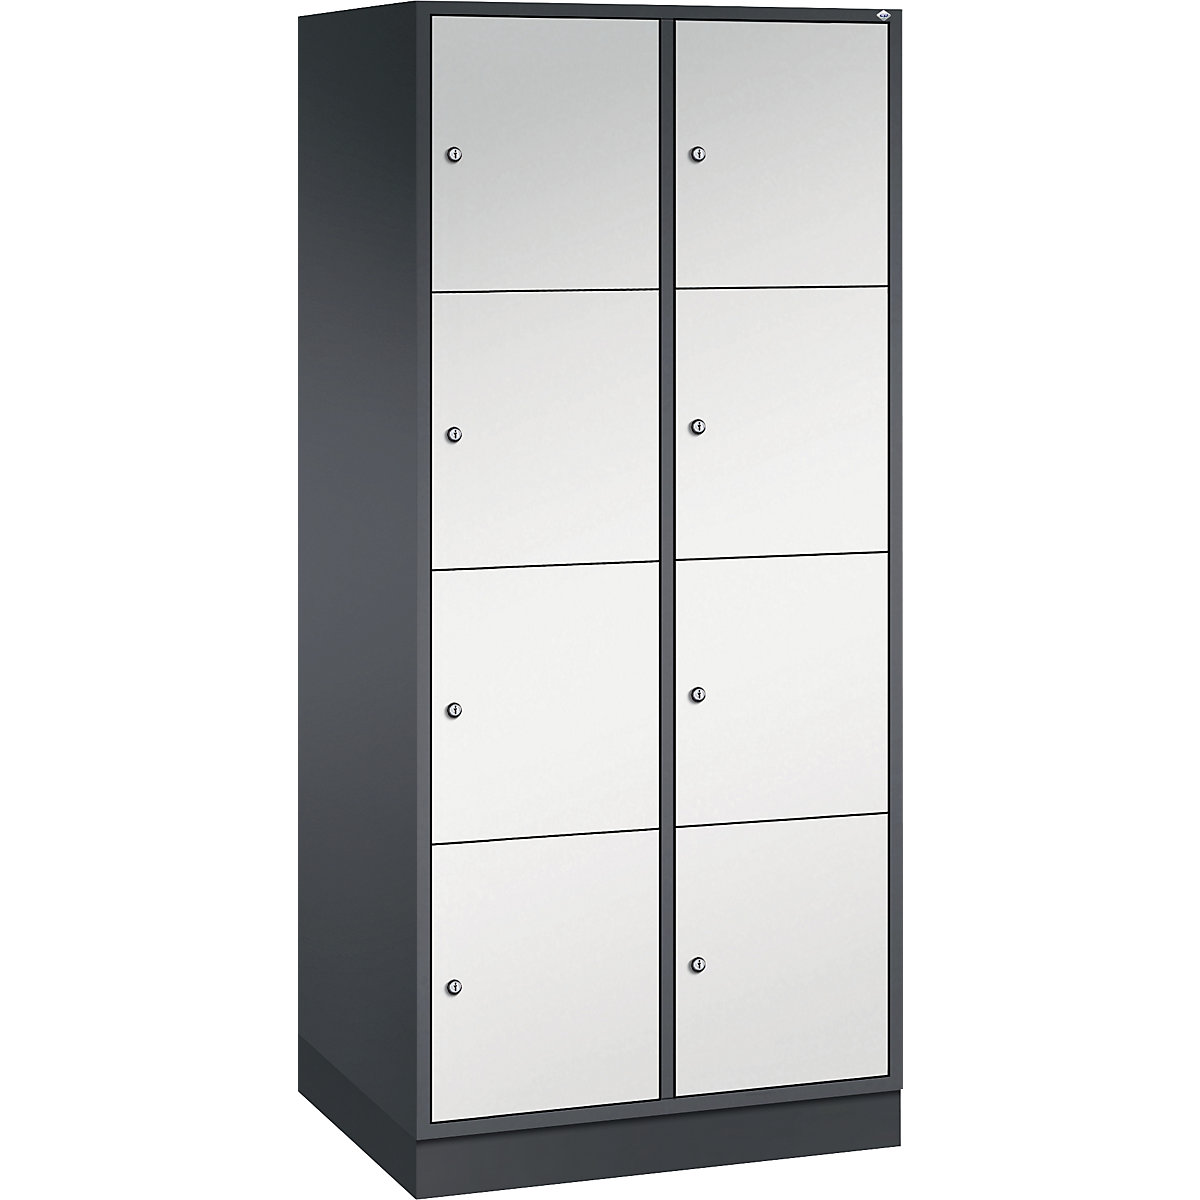 INTRO steel compartment locker, compartment height 435 mm – C+P, WxD 820 x 600 mm, 8 compartments, black grey body, light grey doors